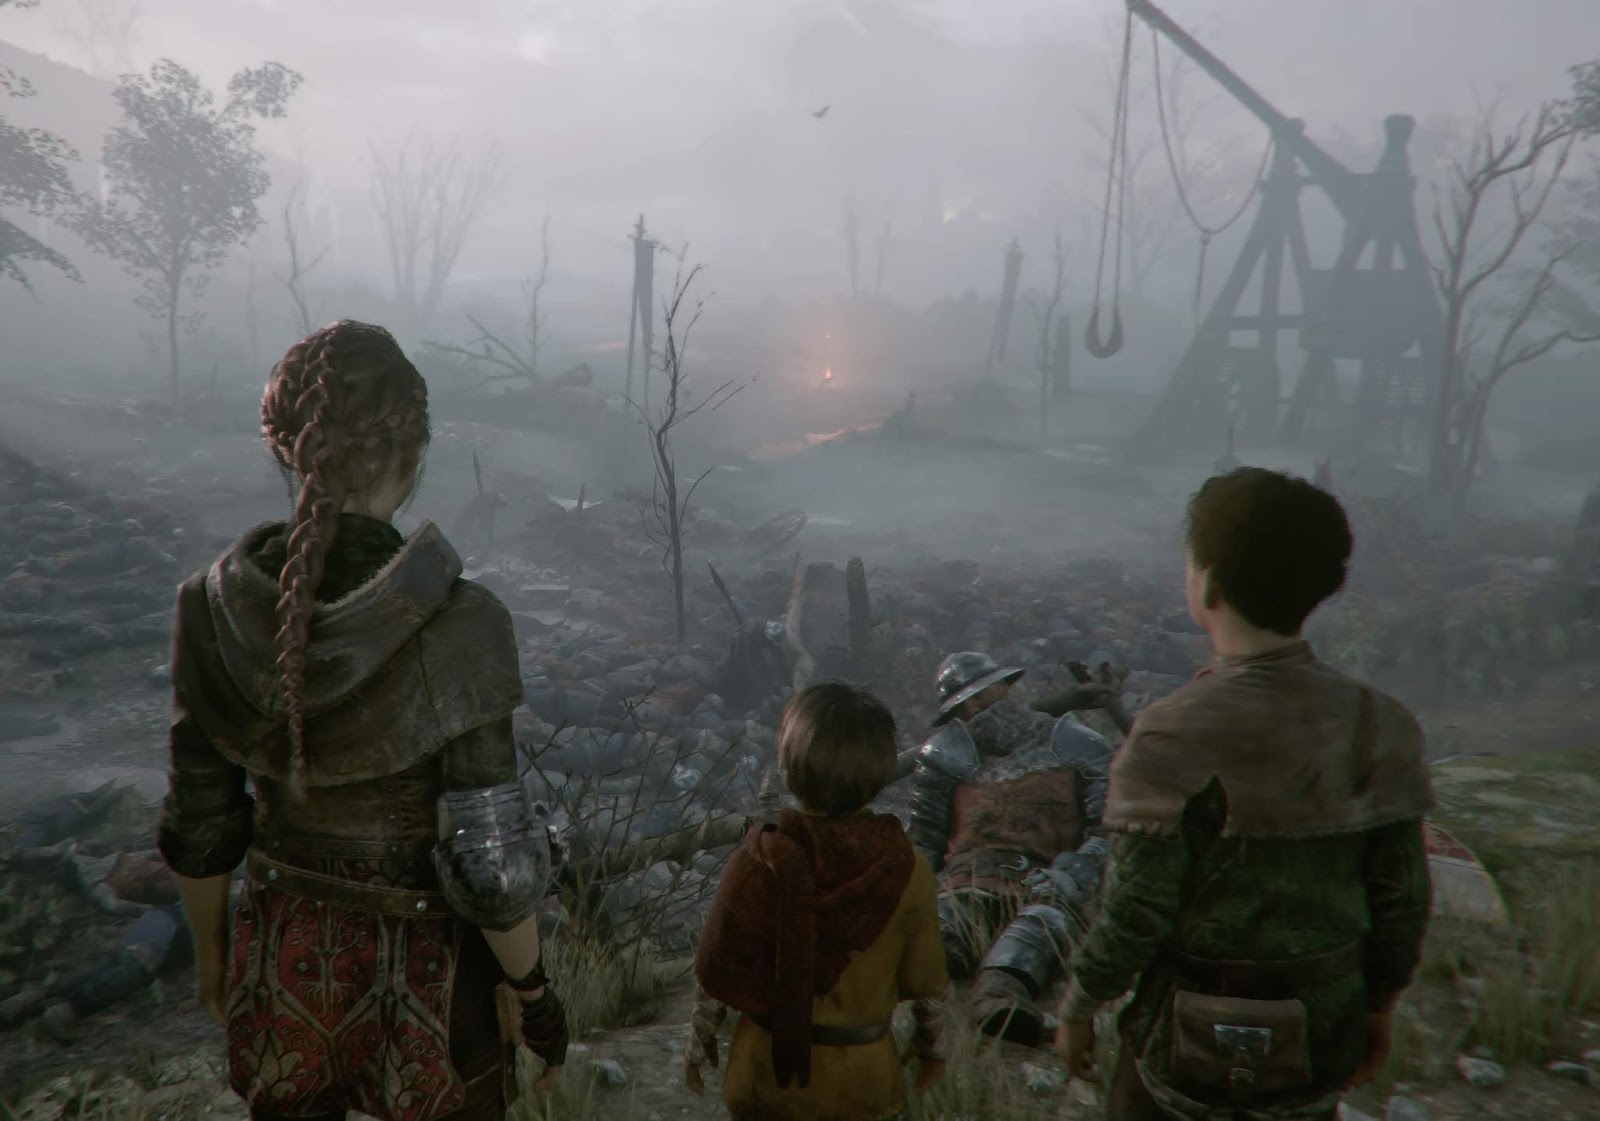 A Plague Tale: Innocence Review - The Indie Game Website